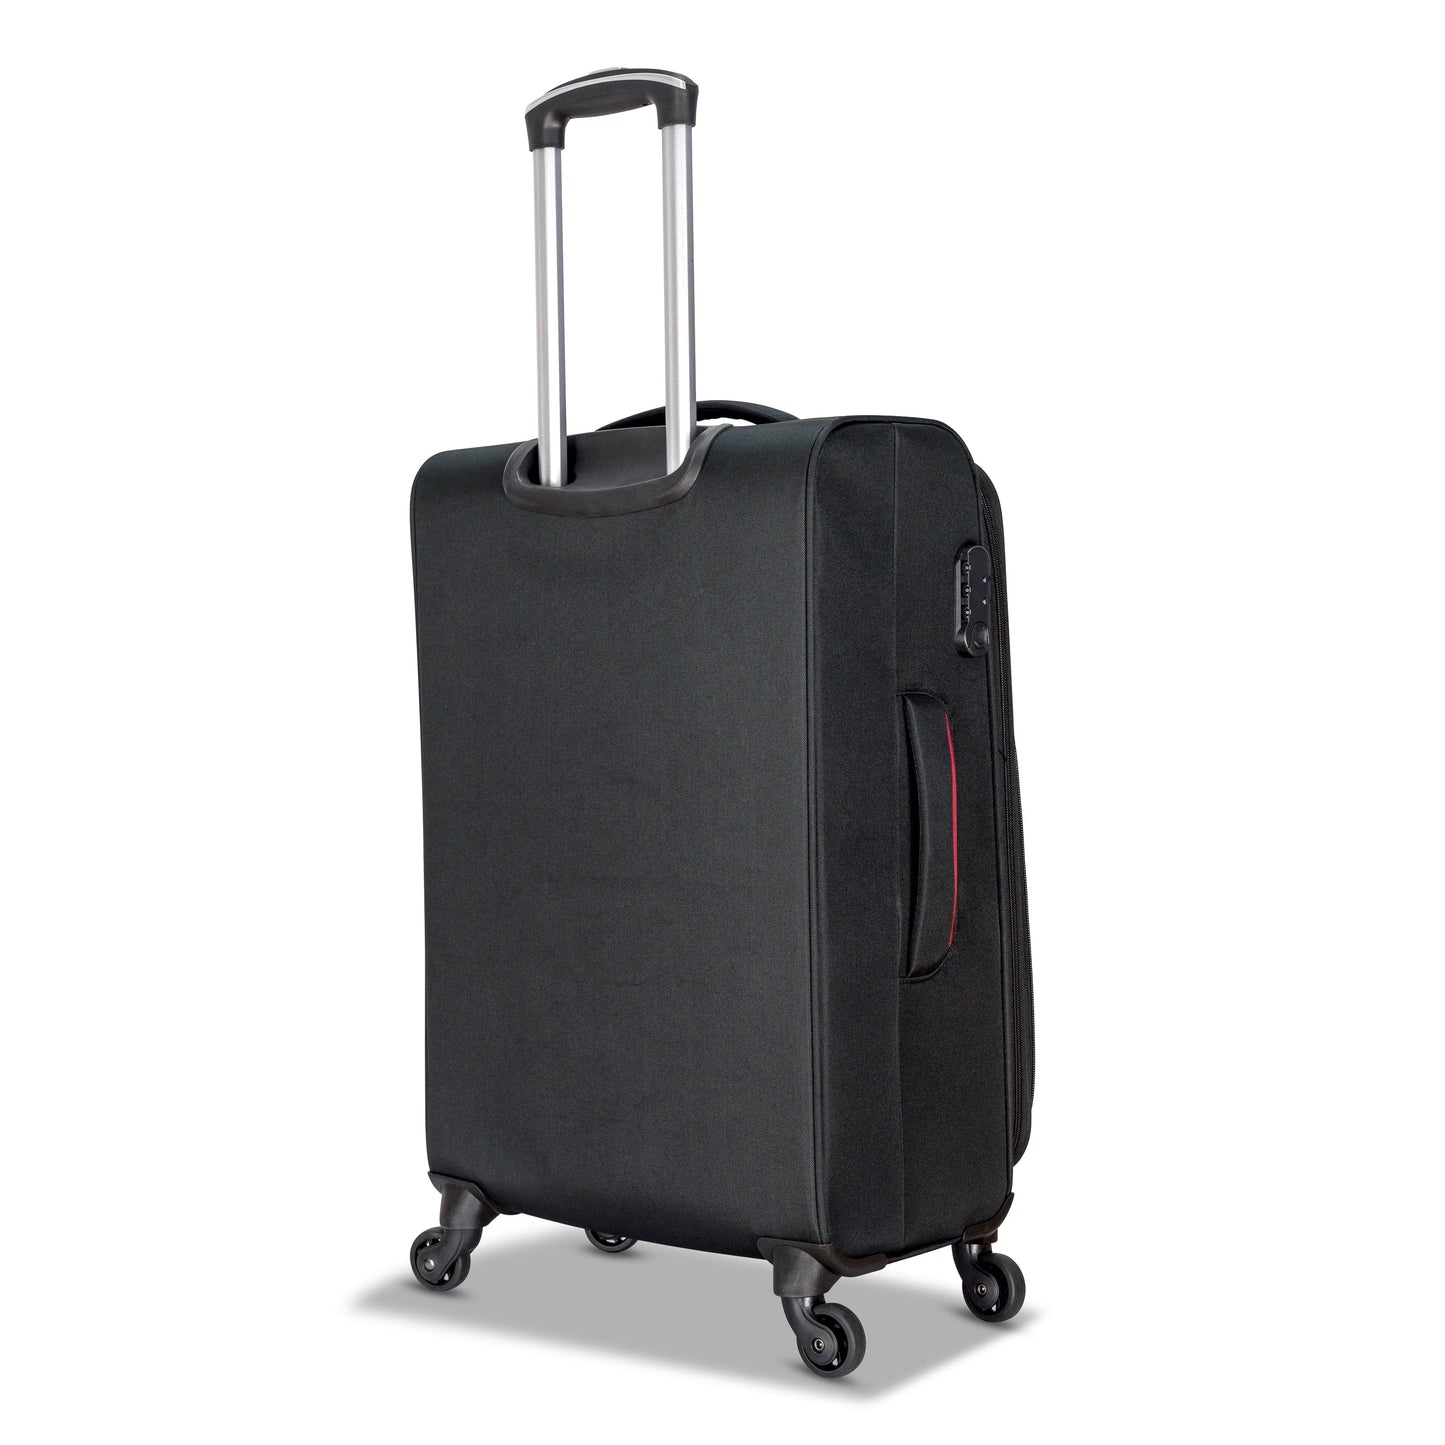 3 Piece Set Soft Side Luggage with Contrast Piped Trim